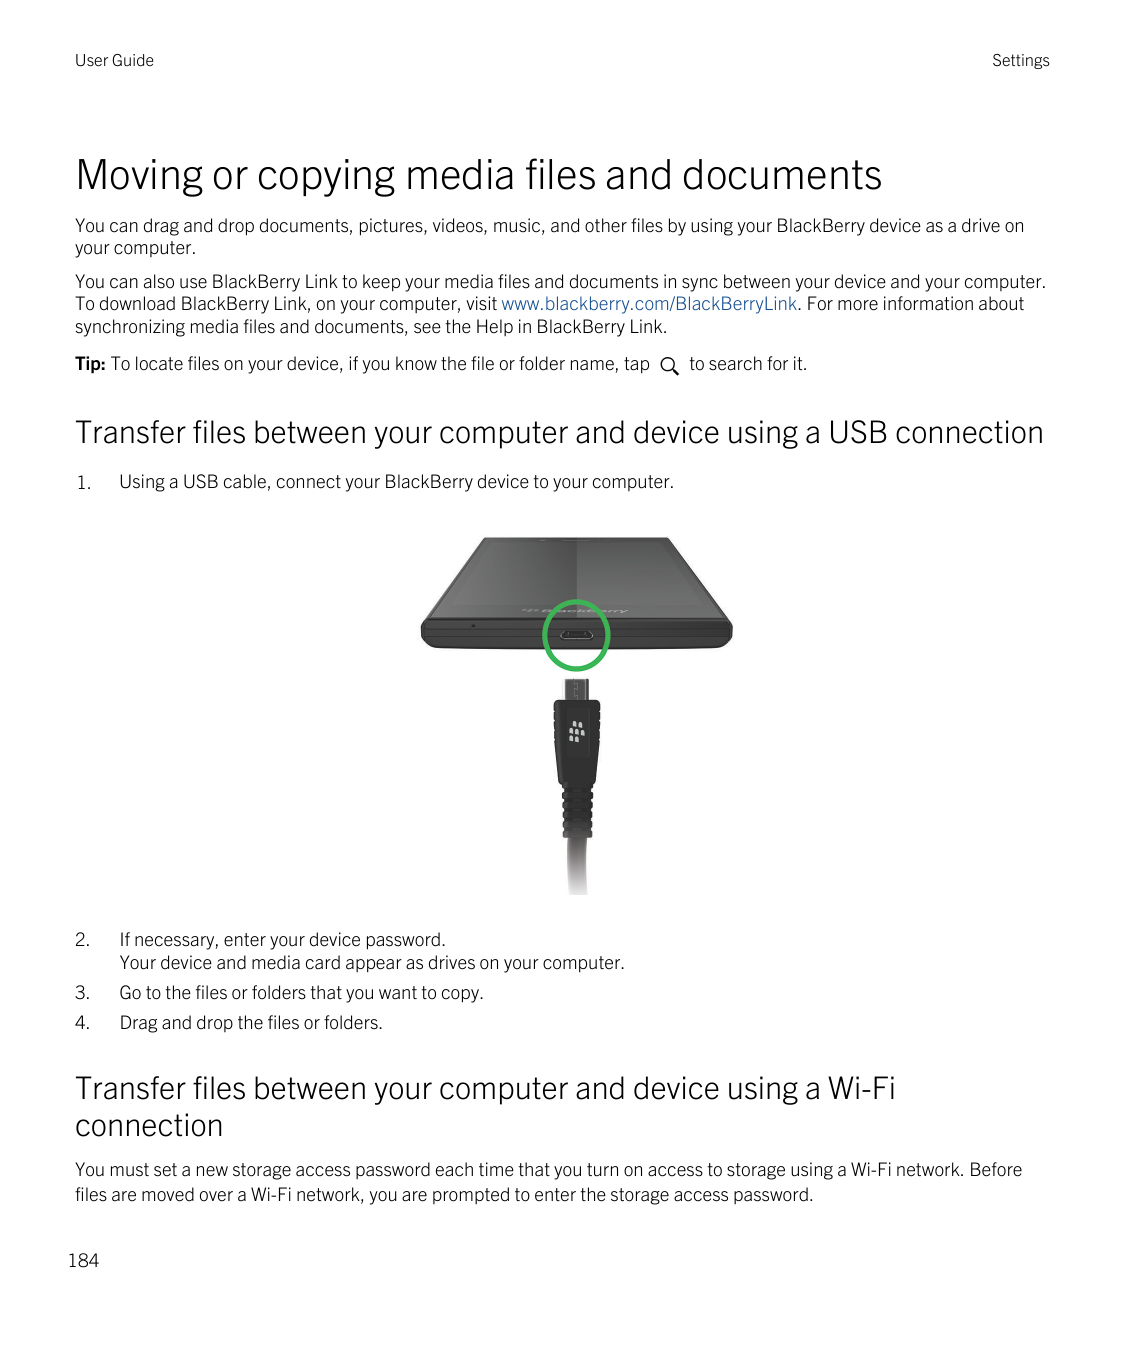 User GuideSettingsMoving or copying media files and documentsYou can drag and drop documents, pictures, videos, music, and other